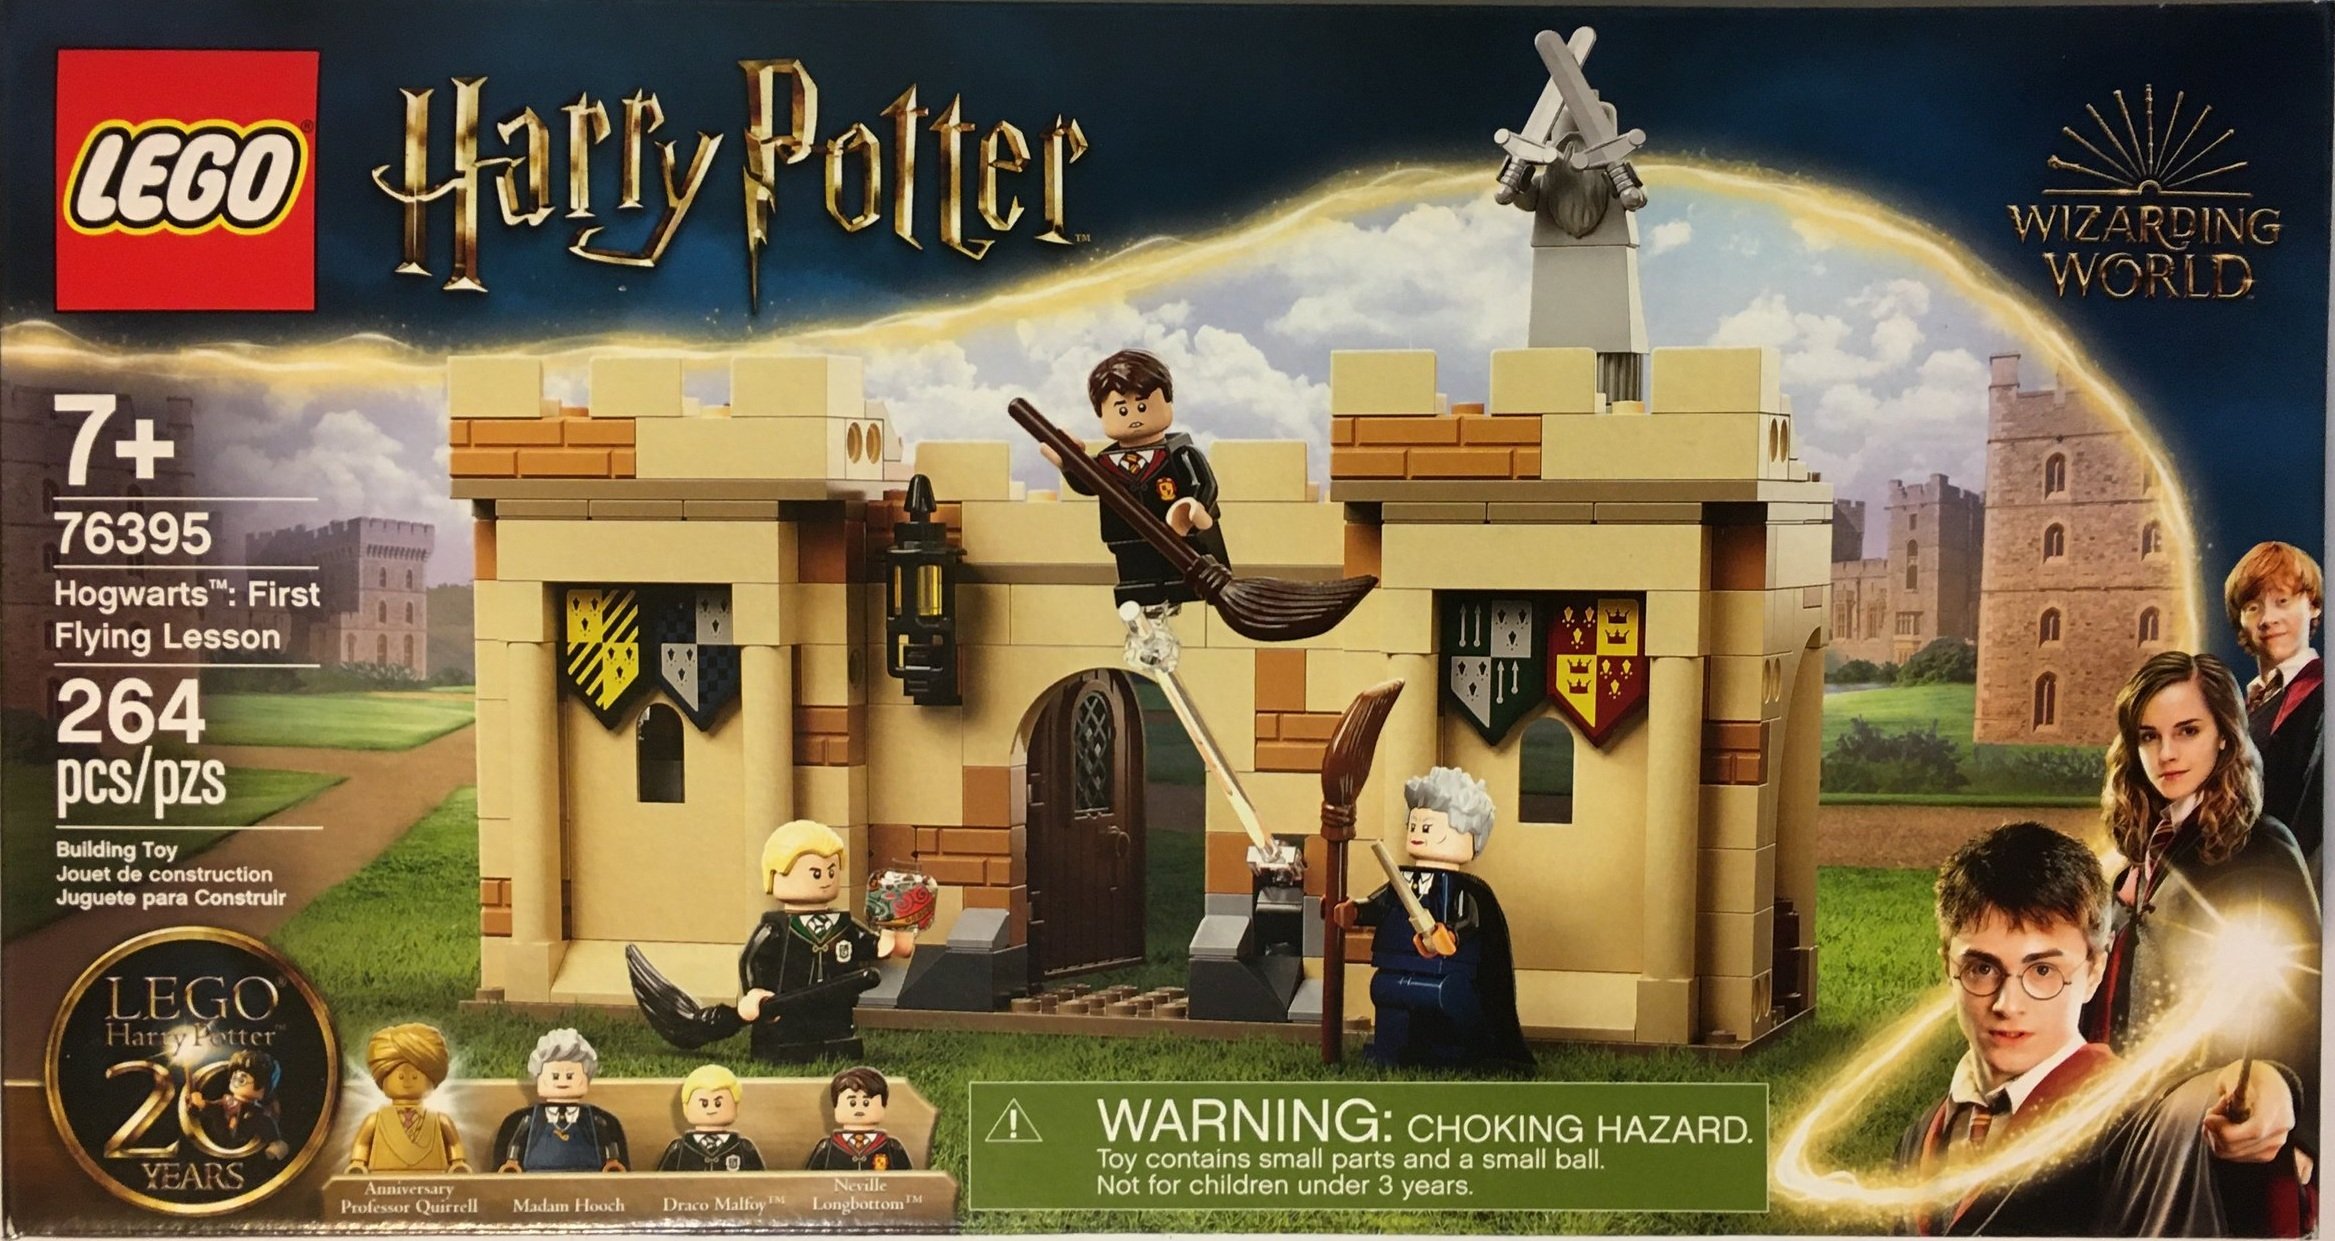 Review LEGO Harry Potter Collection